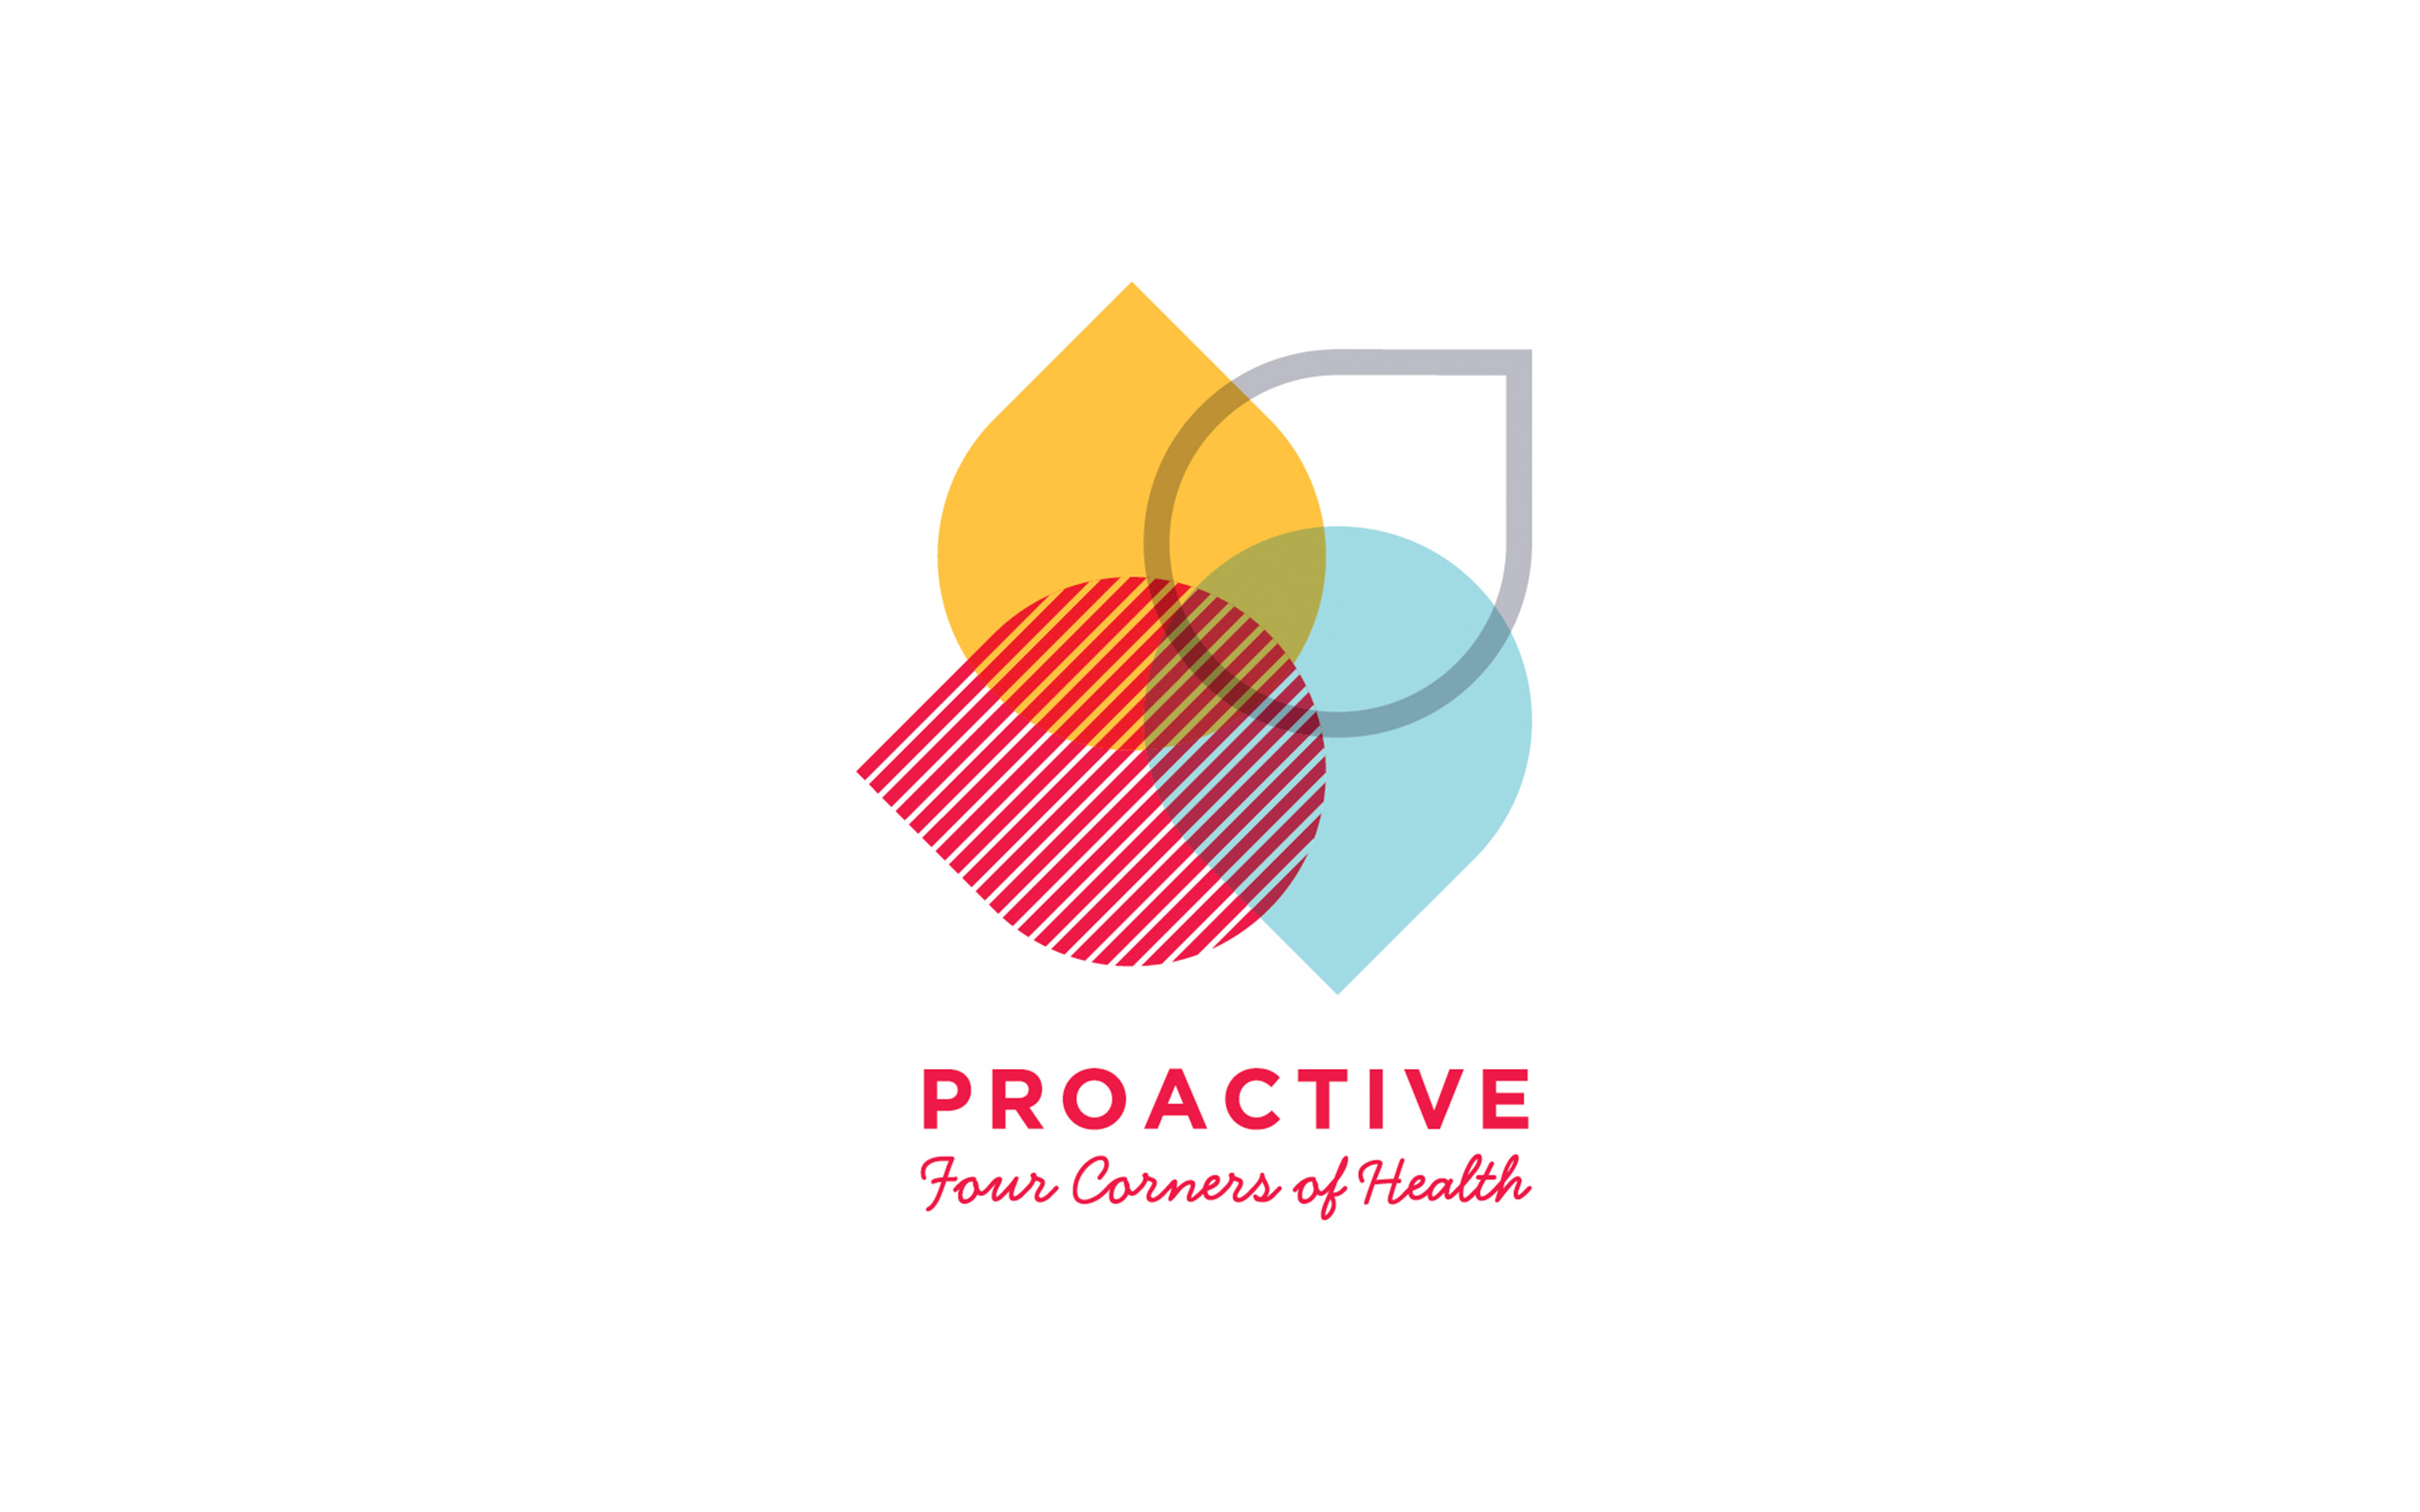 A gold-award winning brand project for Proactive who are New Zealand's leading health provider for accident rehabilitation.